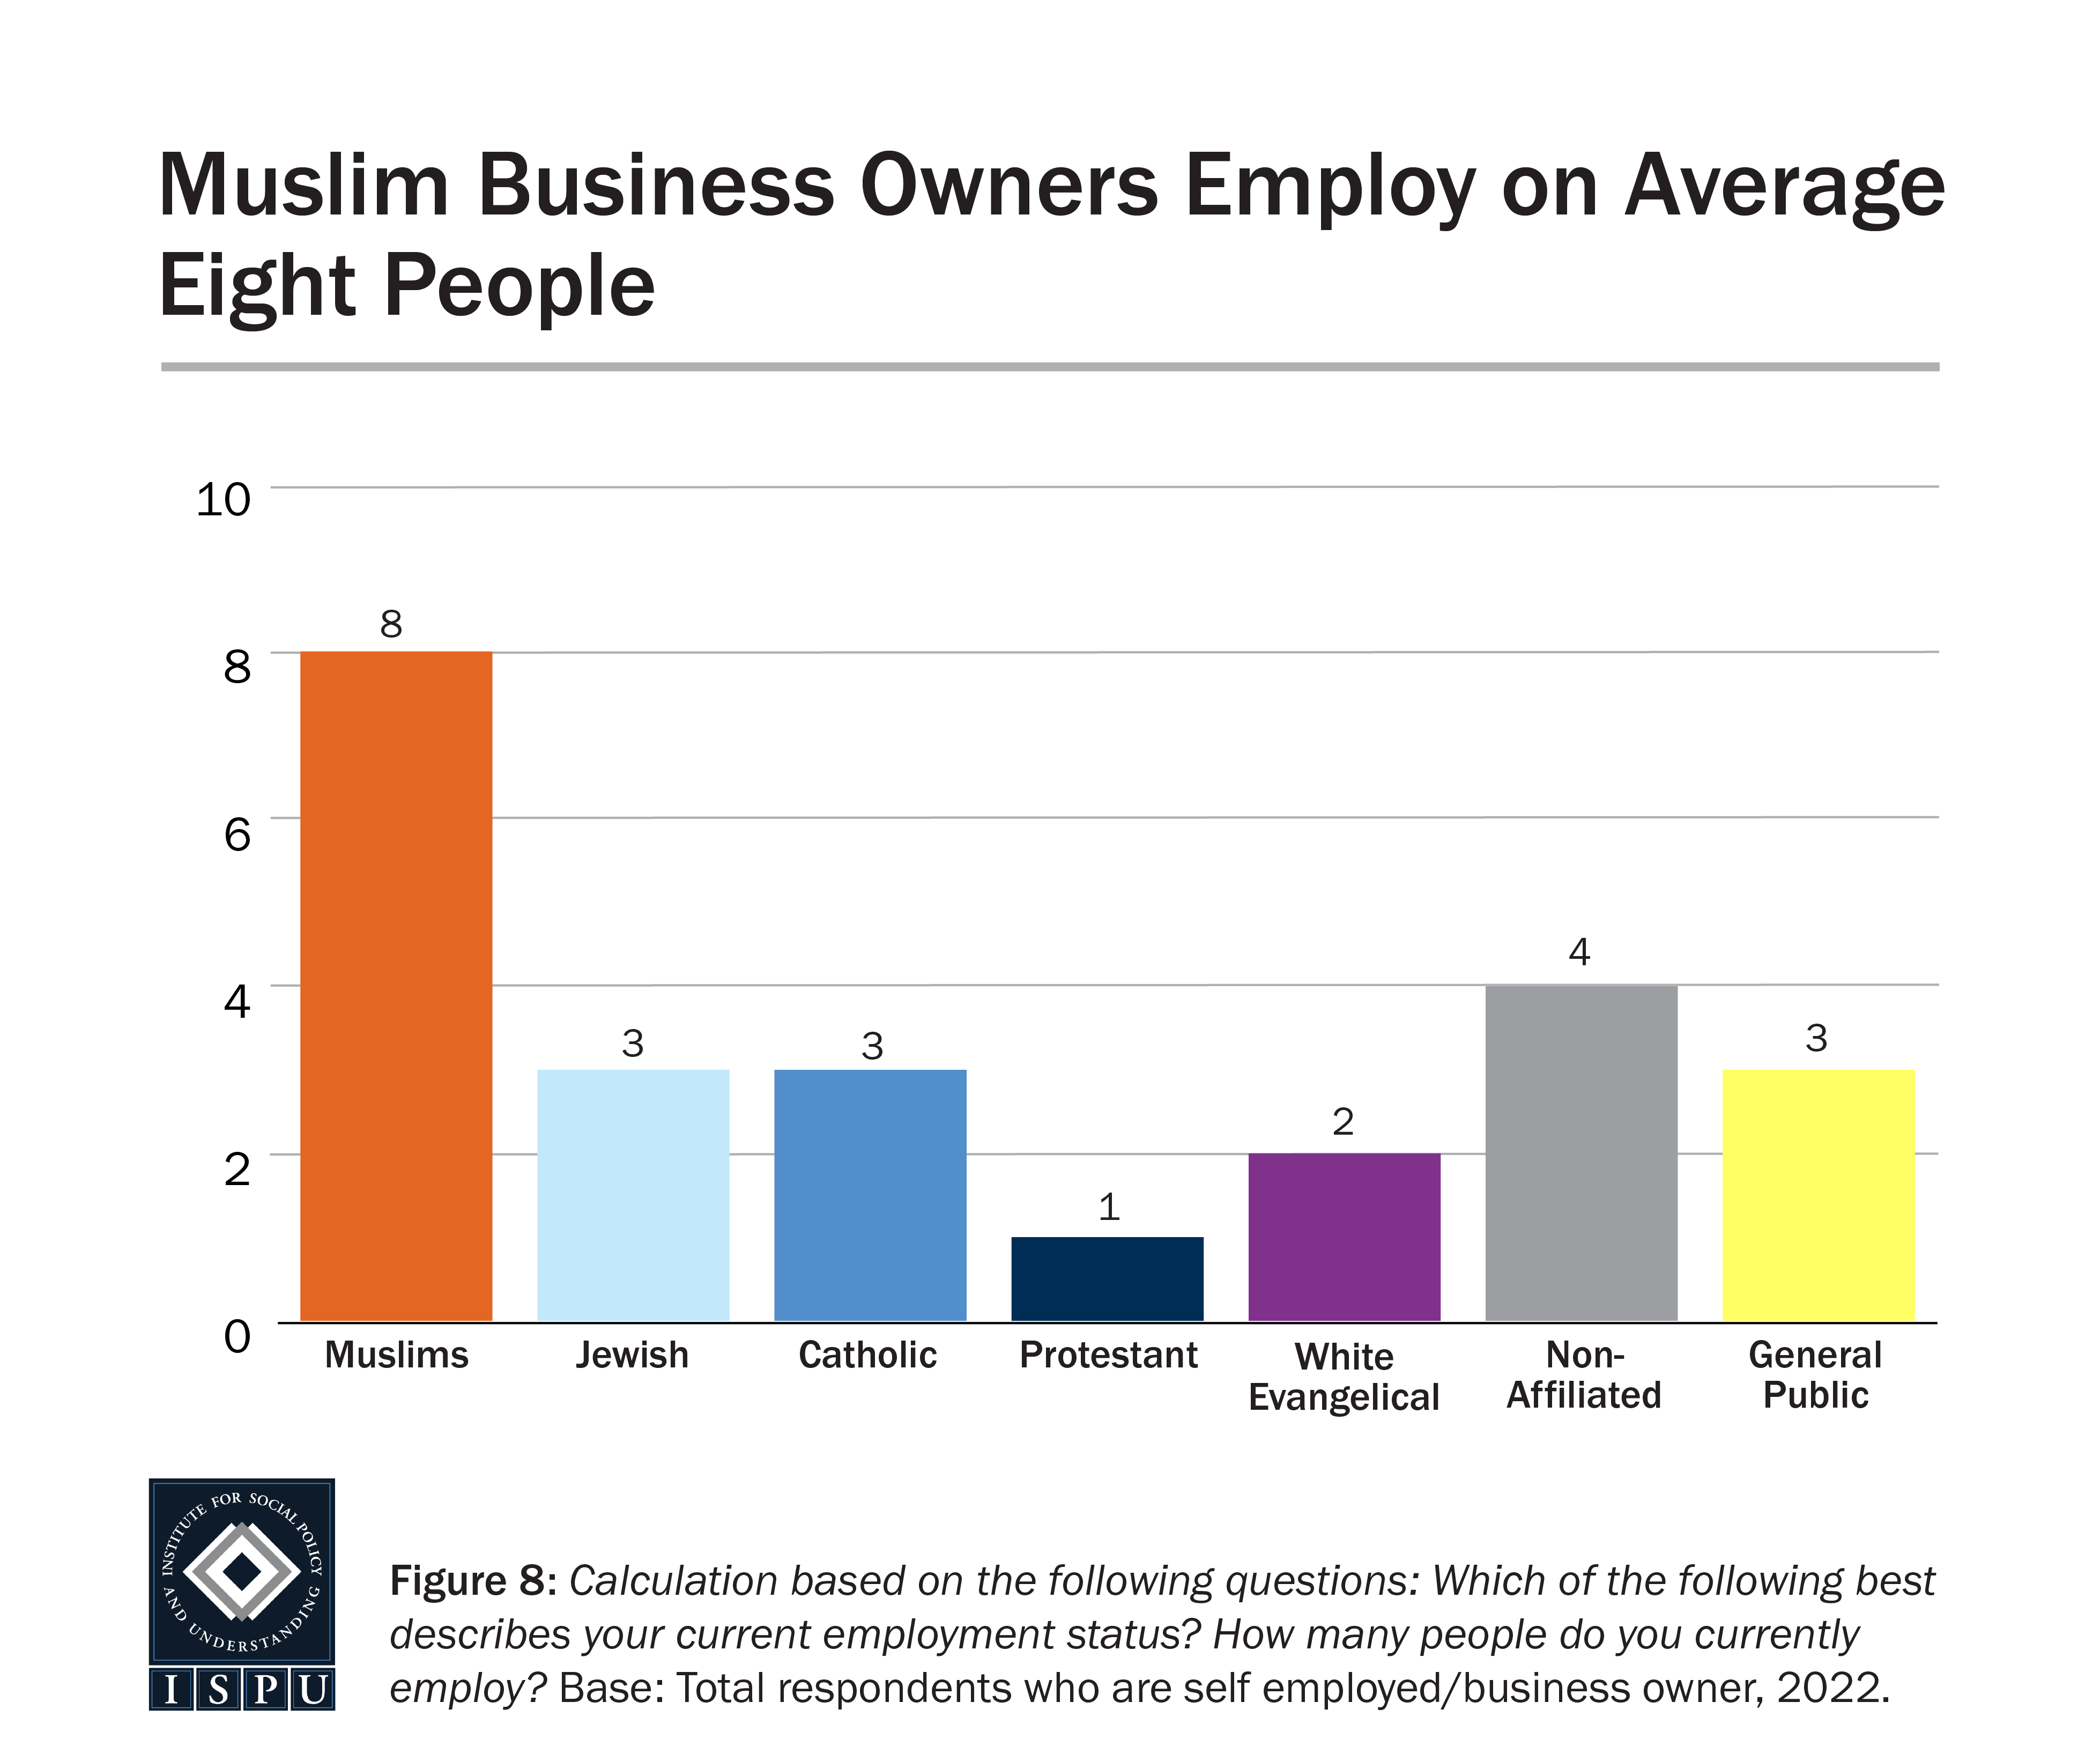 A bar graph showing the average number of people employed by business owners in each group